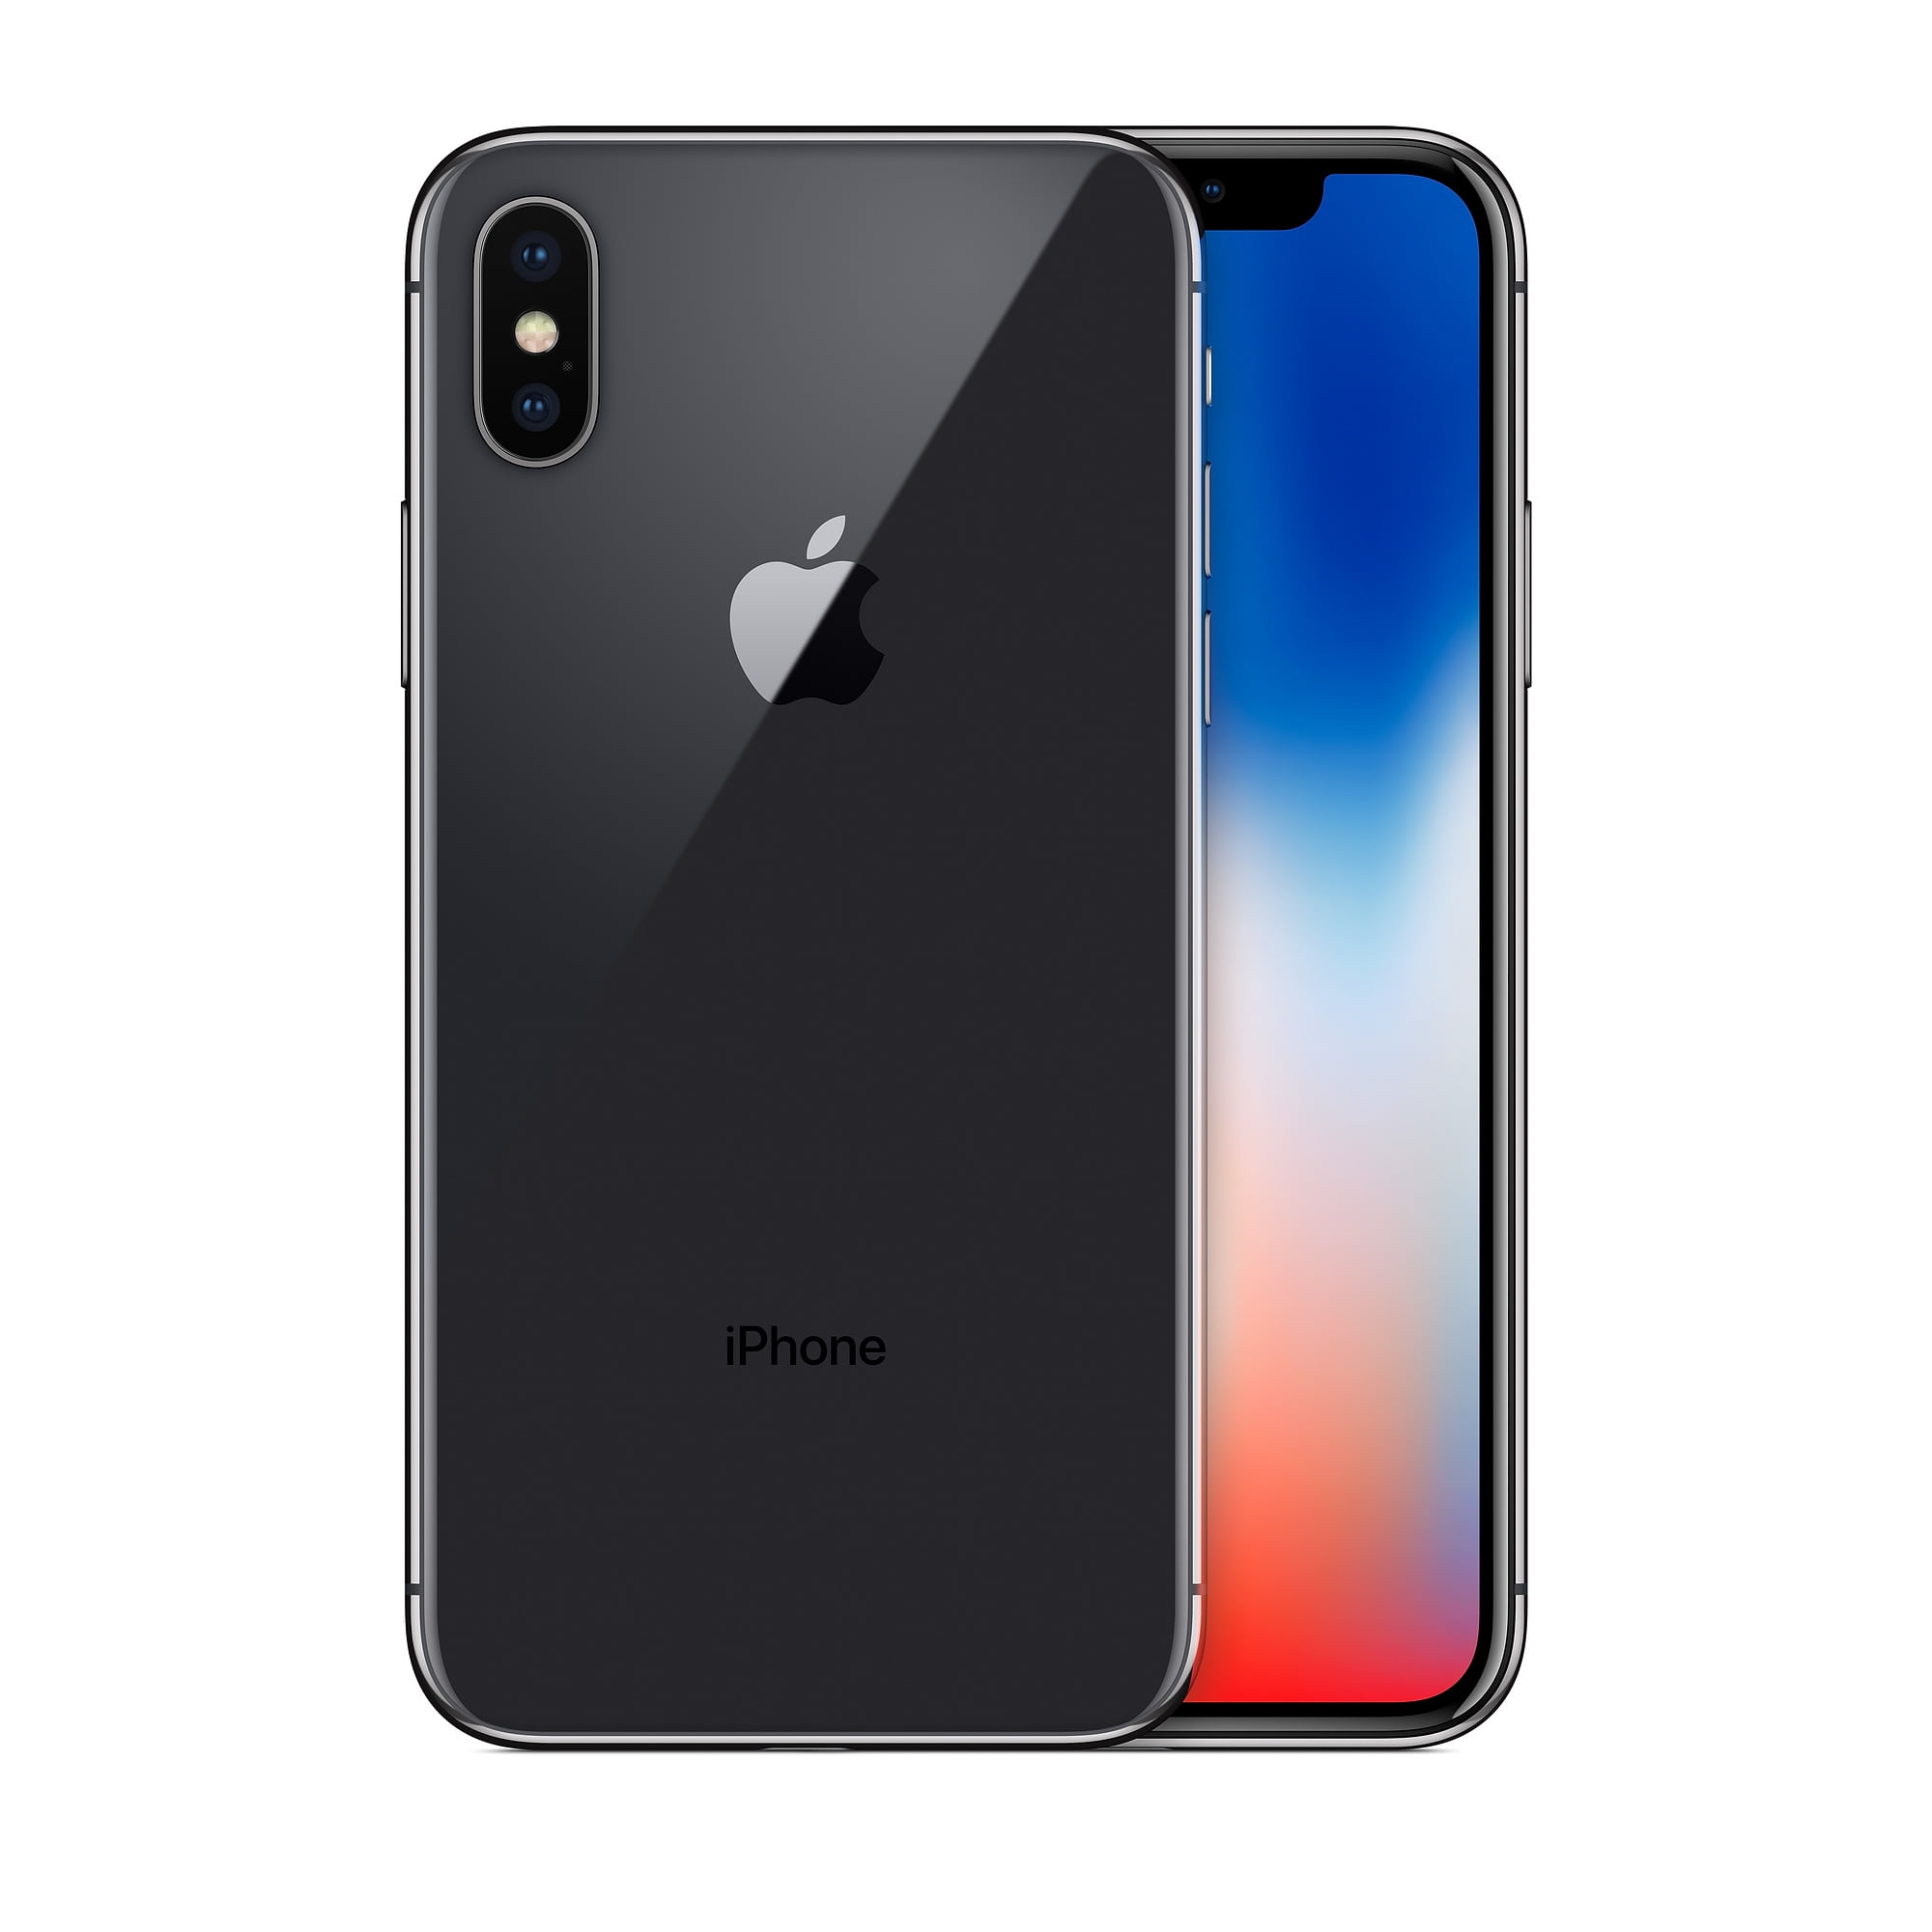 Pre-Owned iPhone X 256GB Gray (Unlocked) (Refurbished: Good)